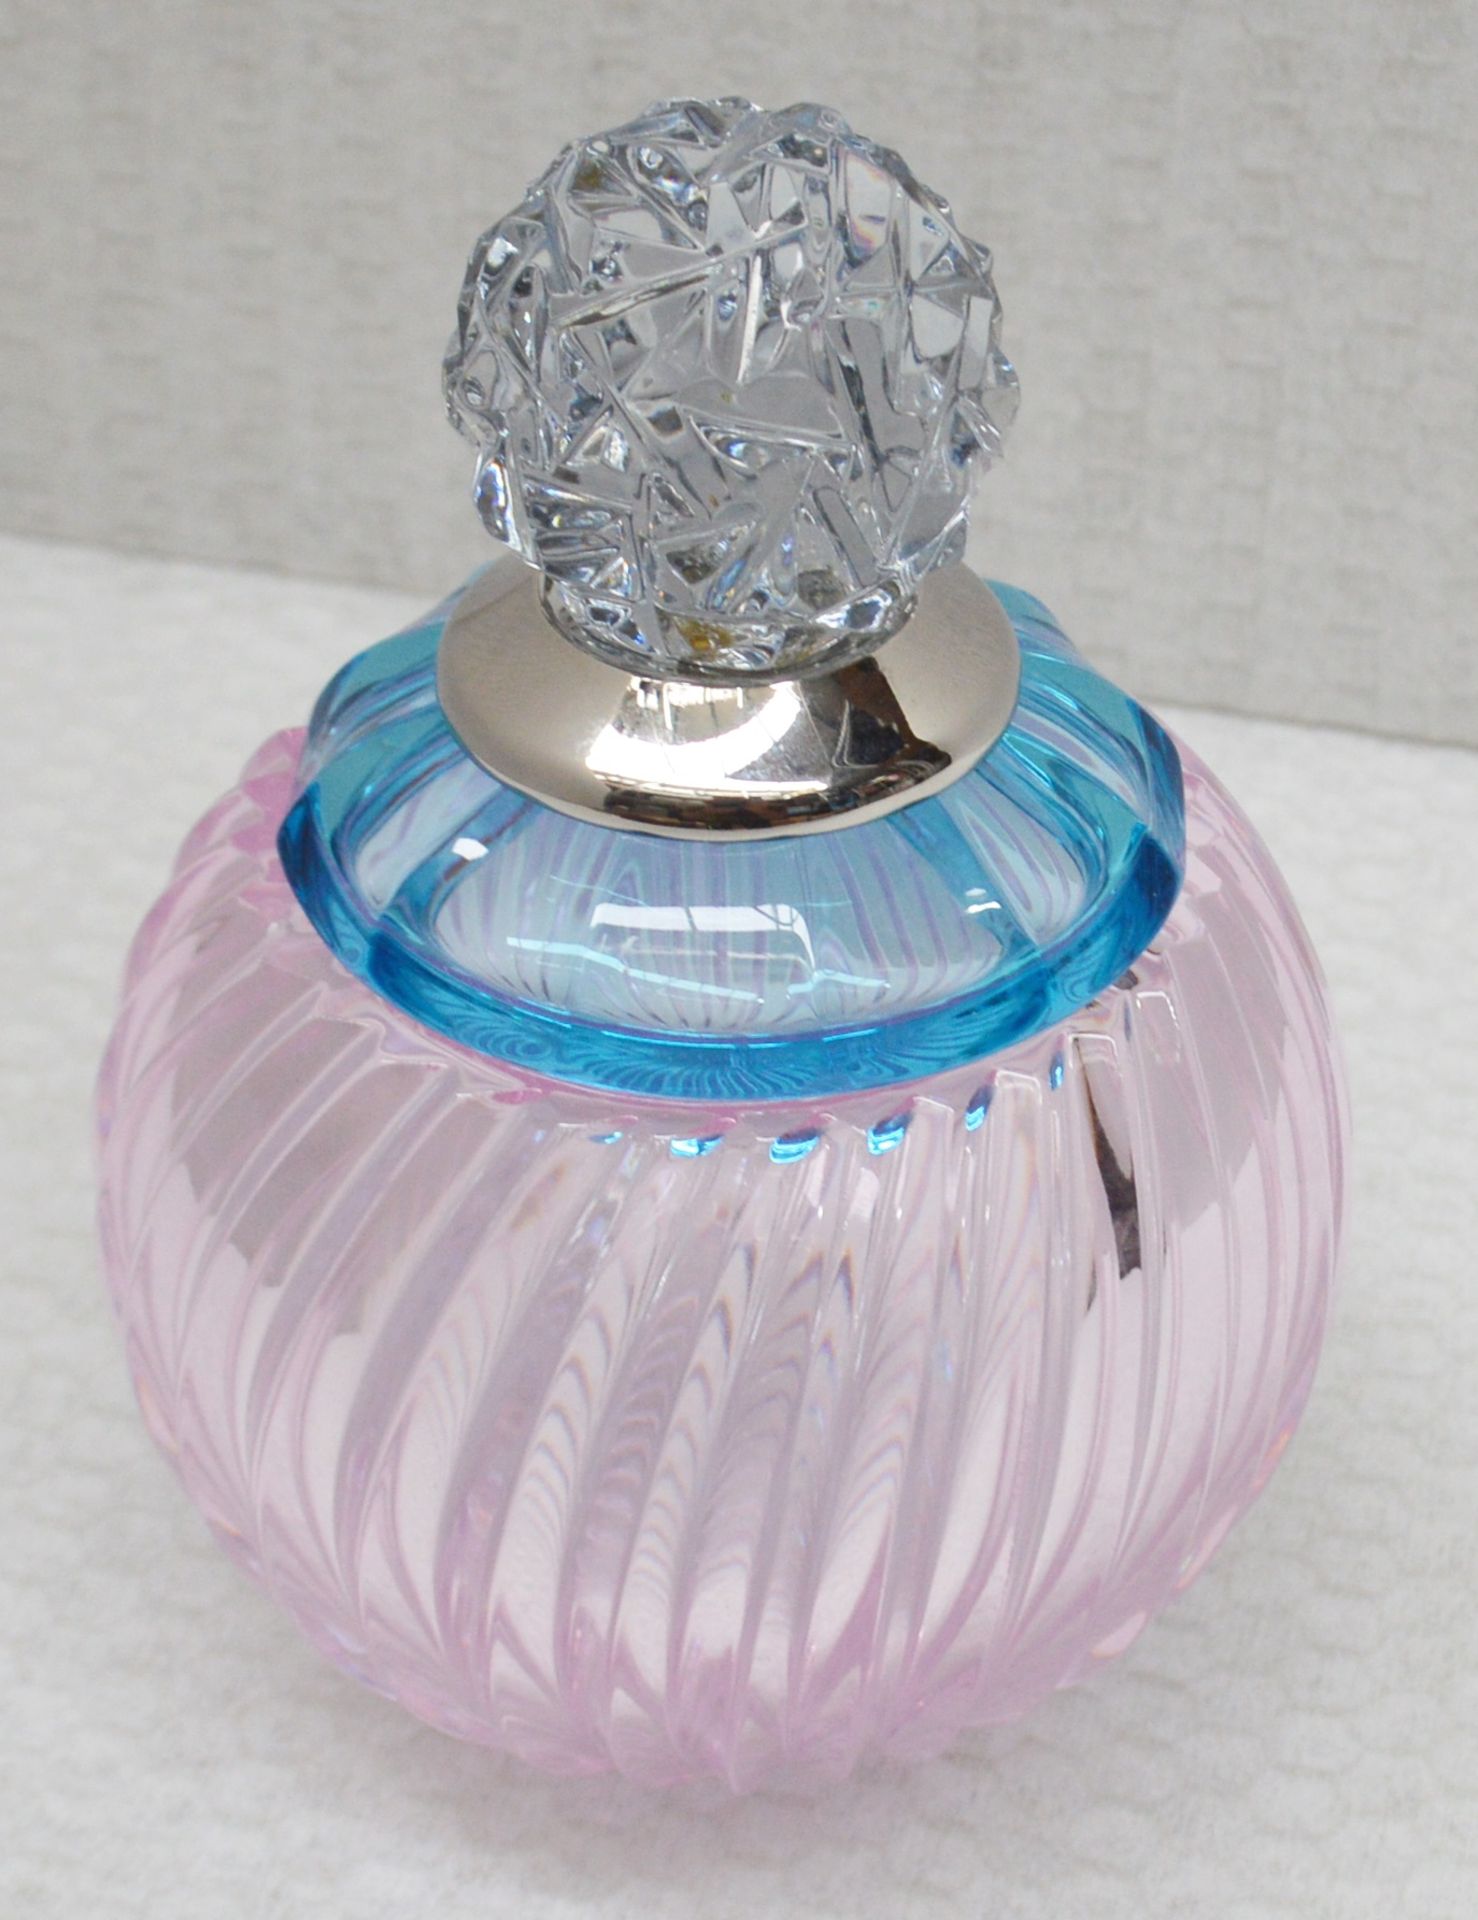 1 x BALDI 'Home Jewels' Italian Hand-crafted Artisan Small Coccinella Jar In Blue, Pink And Clear